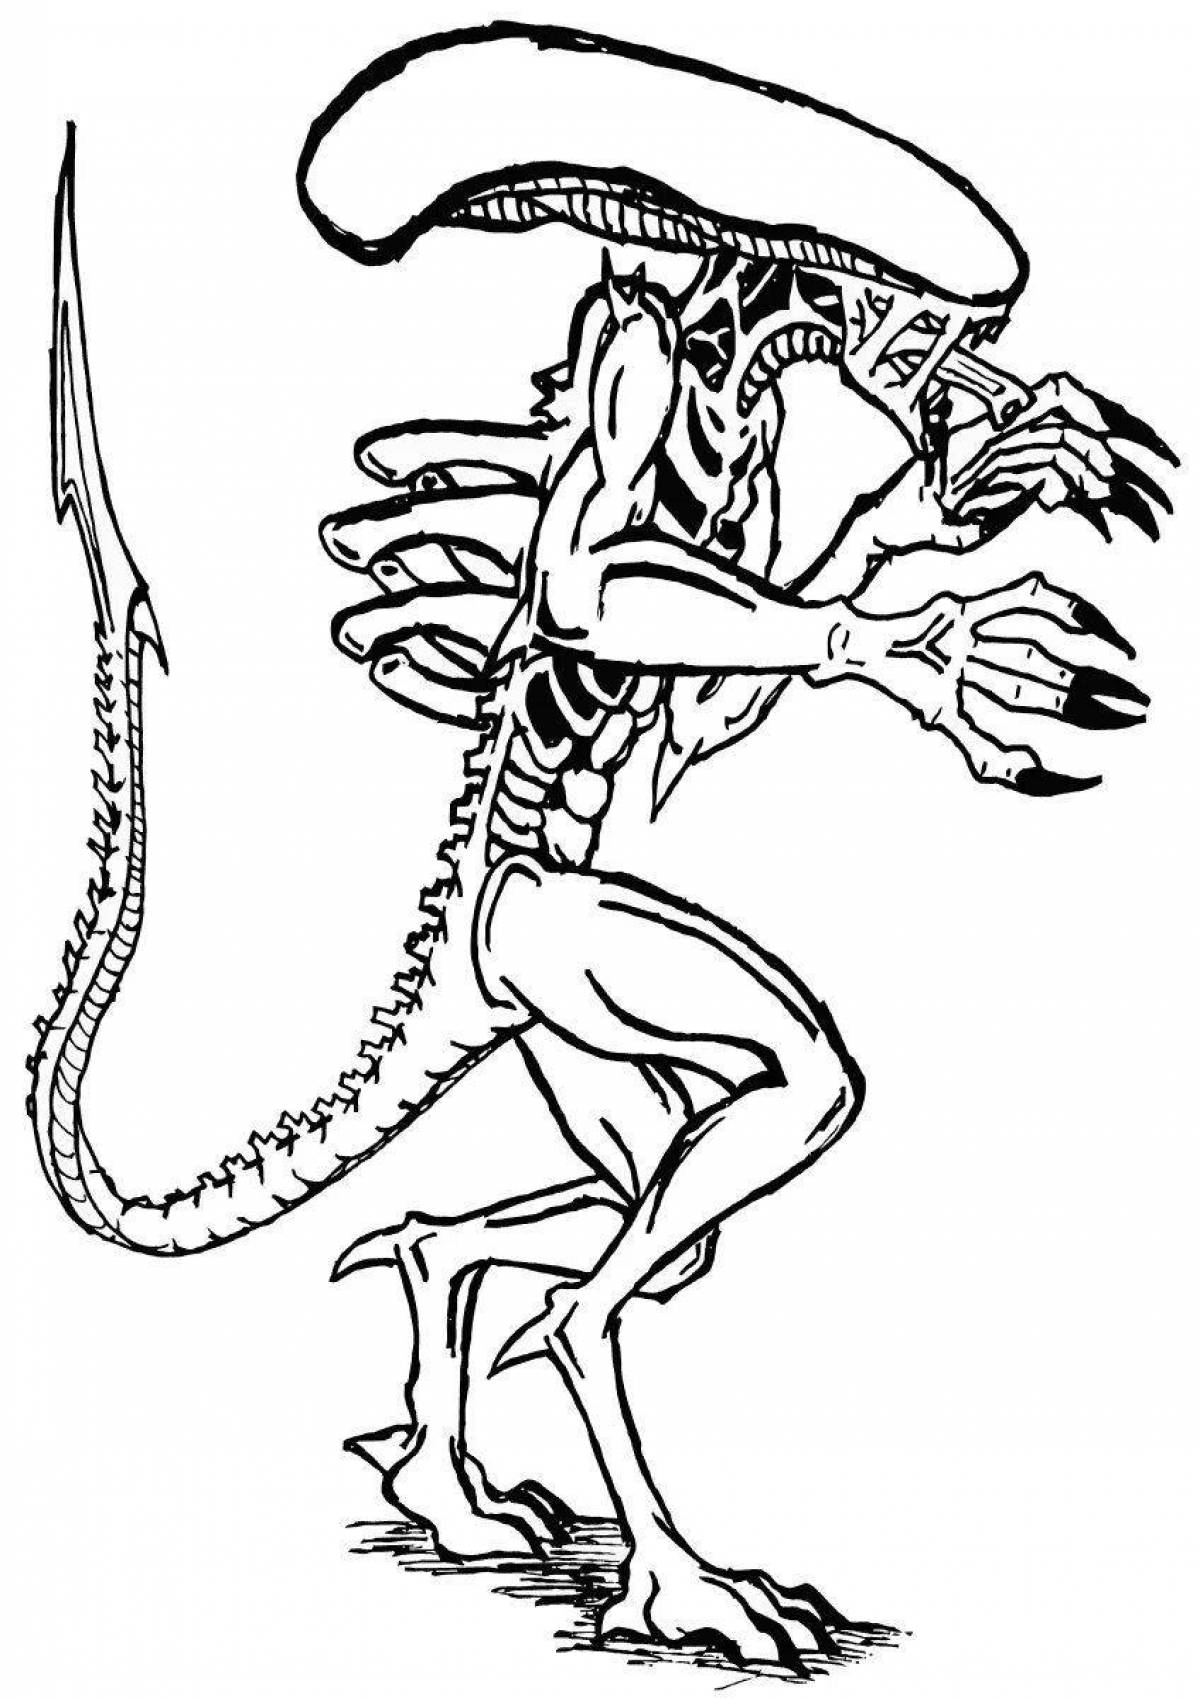 Awesome siren head coloring page for boys